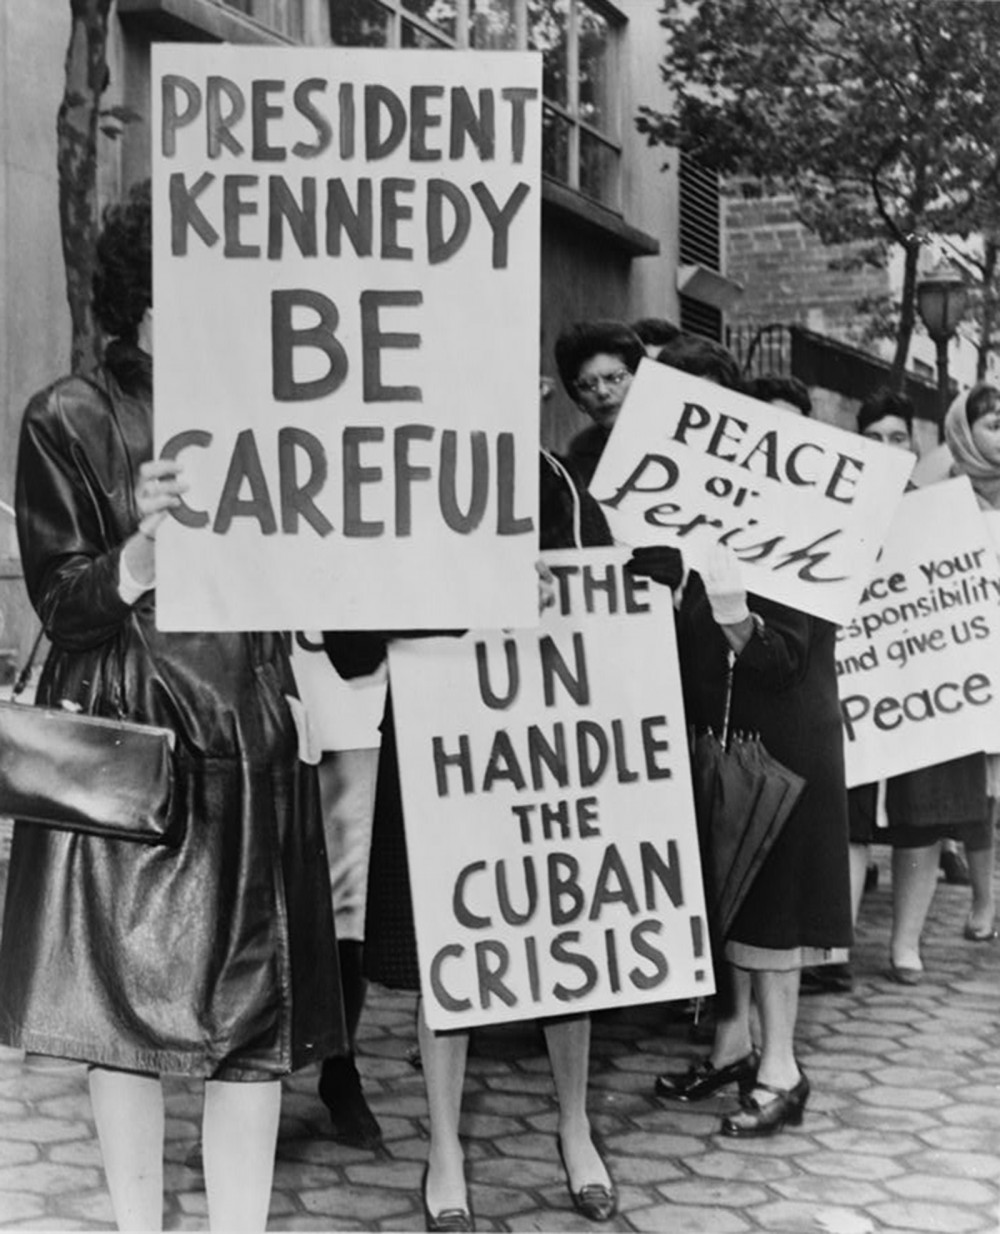 The Cuban Missile Crisis was a time of great fear throughout America. Women in this photograph urged President Kennedy to be cautious of instigating war. Phil Stanziola, “800 women strikers for peace on 47 St near the UN Bldg,” 1962. Library of Congress, http://www.loc.gov/pictures/item/2001696167/.